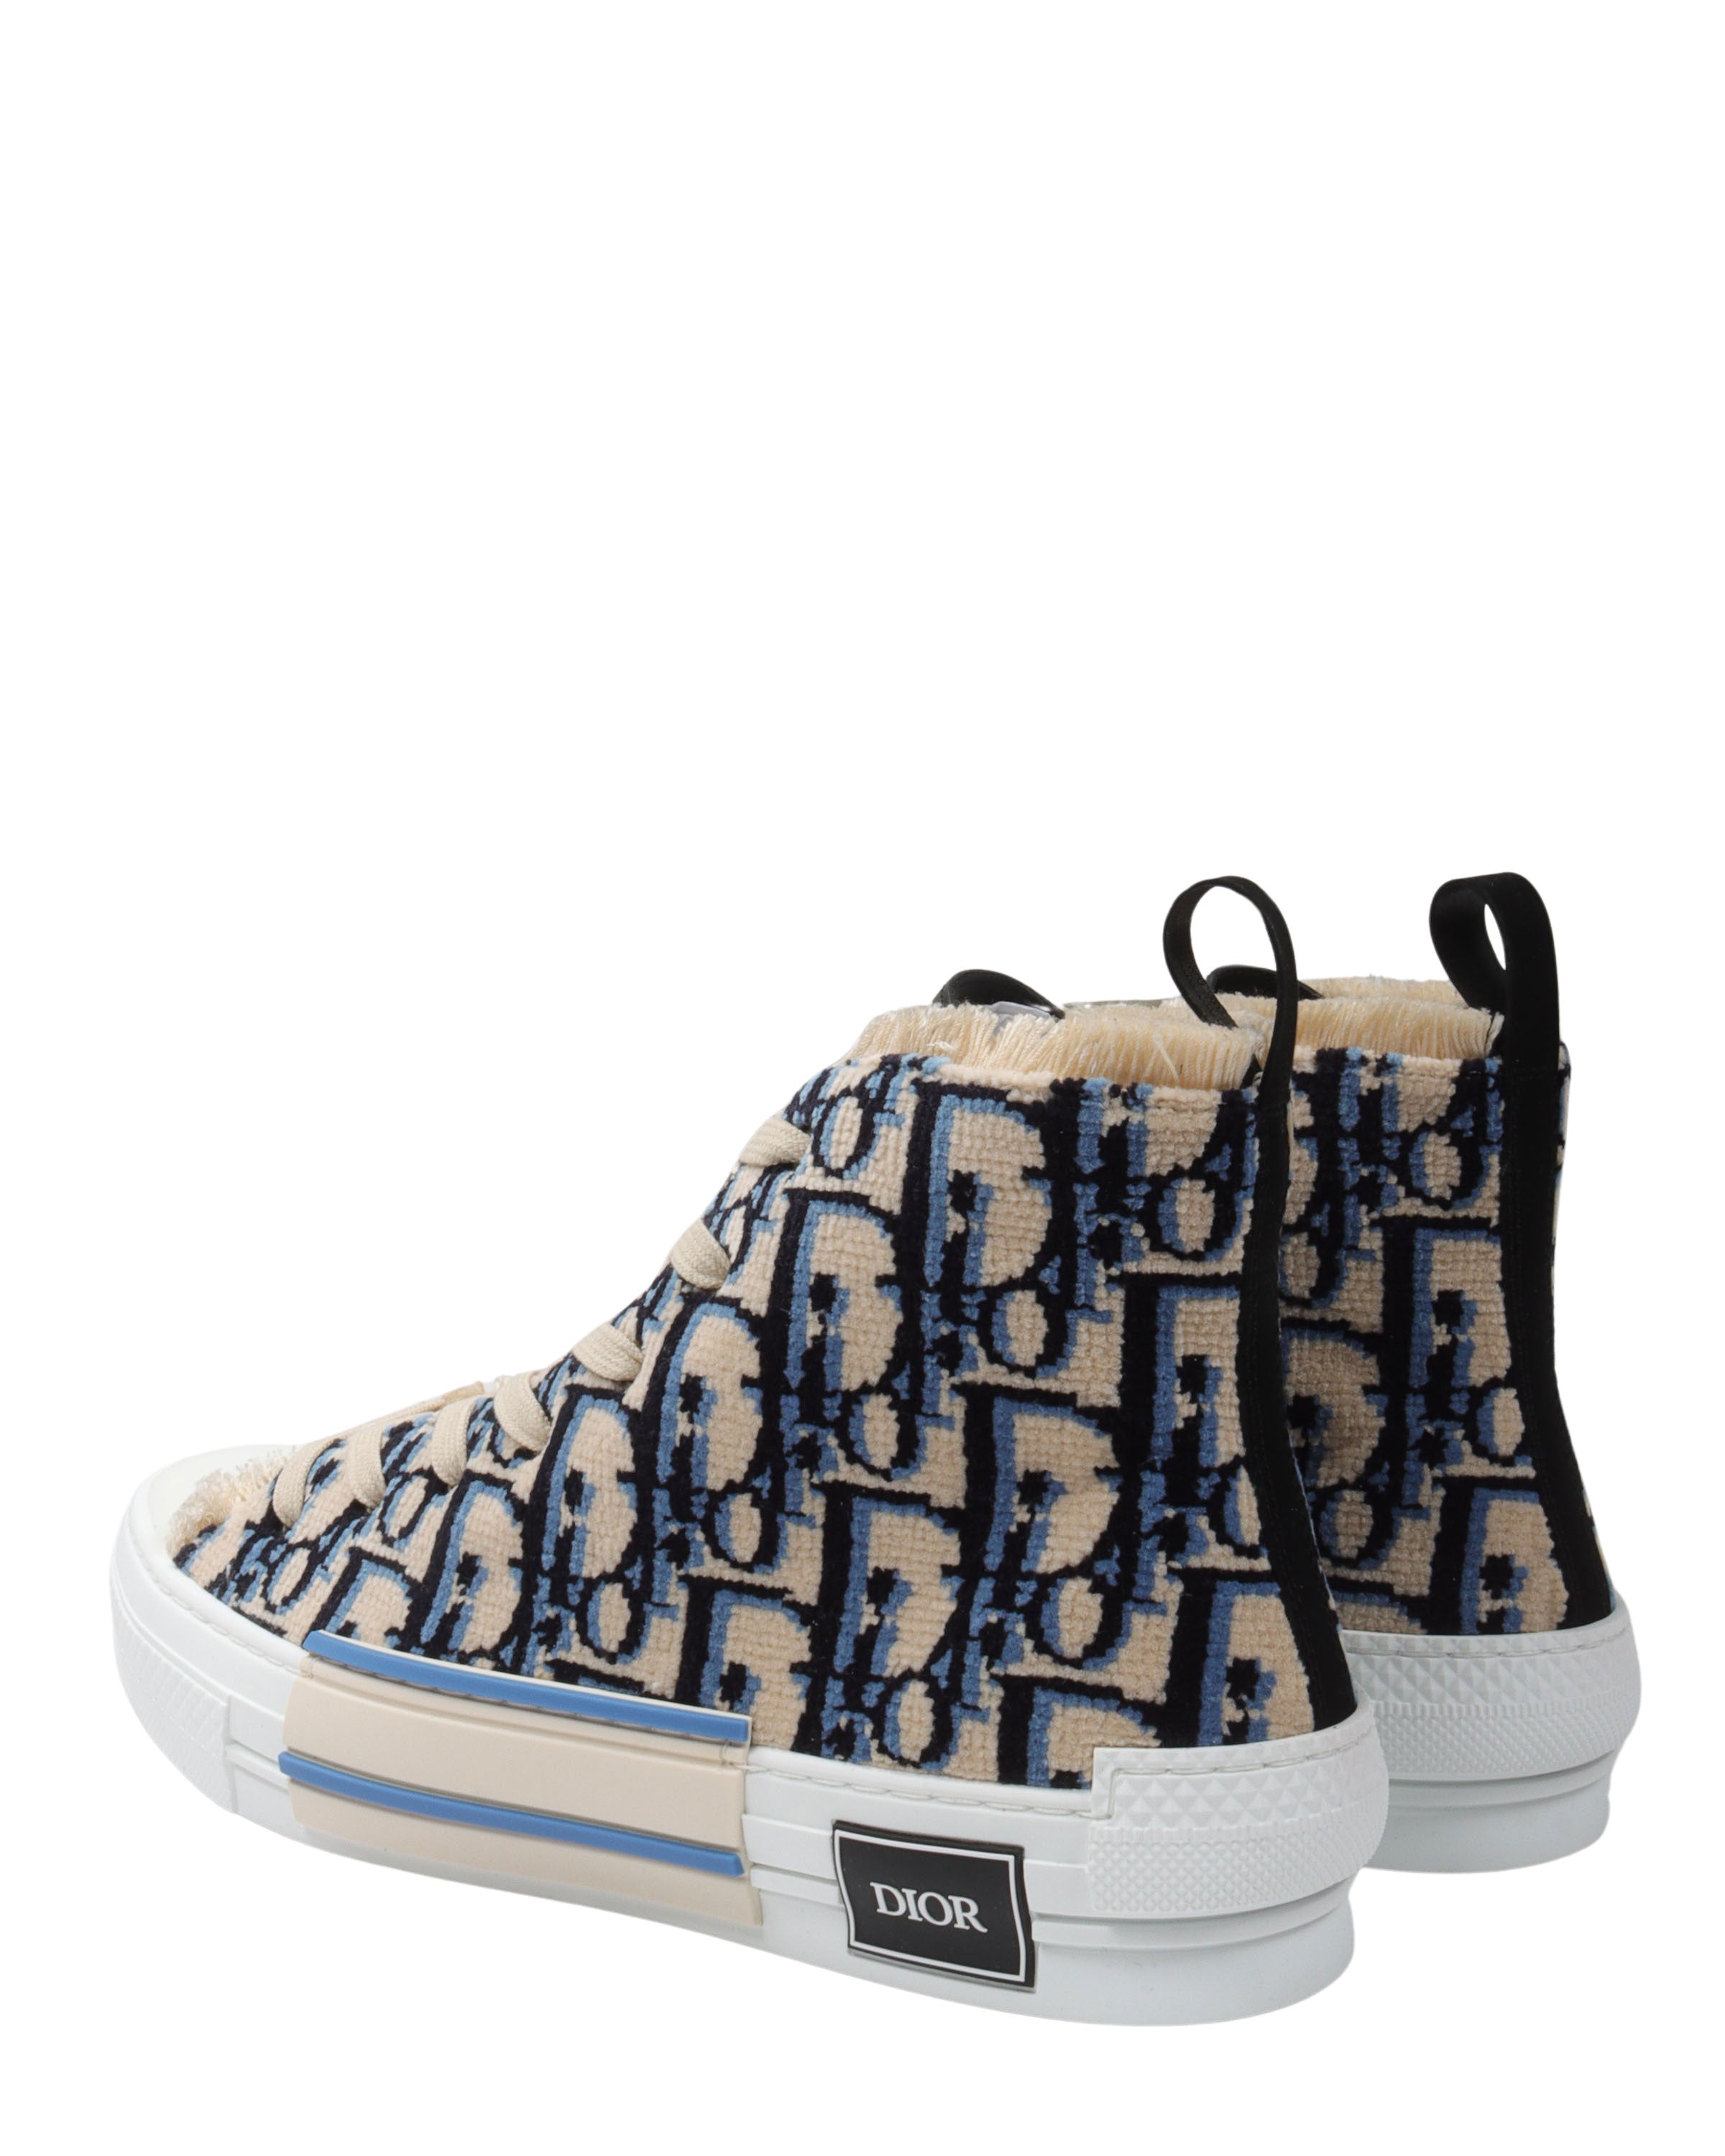 Oblique Tapestry B23 High Sneakers